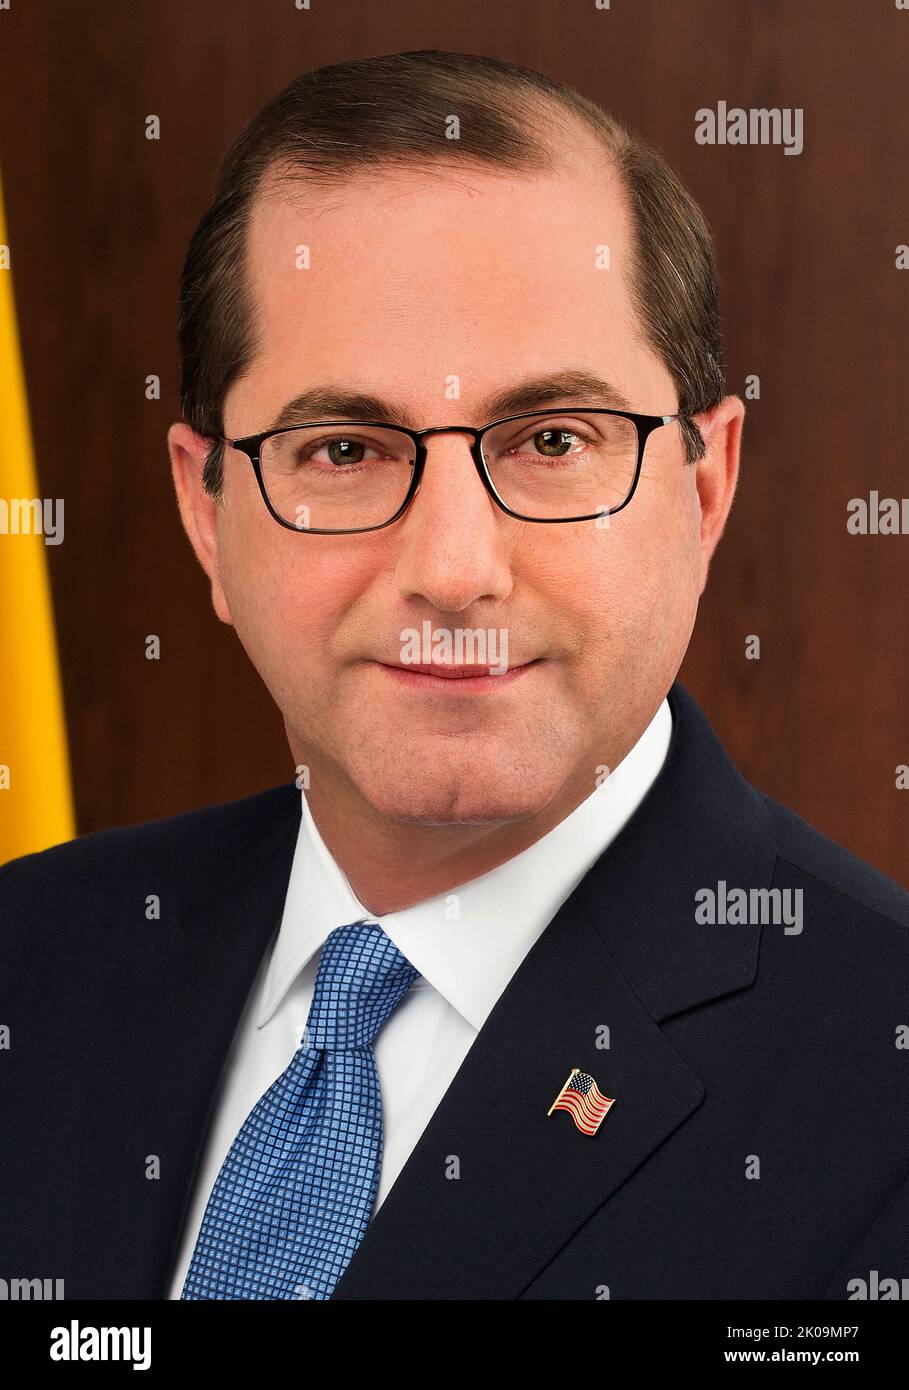 Alex Michael Azar II (born June 17, 1967) American politician, attorney, businessman, lobbyist, and former pharmaceutical executive who served as the United States Secretary of Health and Human Services from 2018 to 2021. Azar was nominated to his post by President Donald Trump on November 13, 2017, and confirmed by the United States Senate on January 24, 2018. He was also chairman of the White House Coronavirus Task Force from its inception in January 2020 to February 2020, when he was replaced by Vice President Mike Pence. Stock Photo